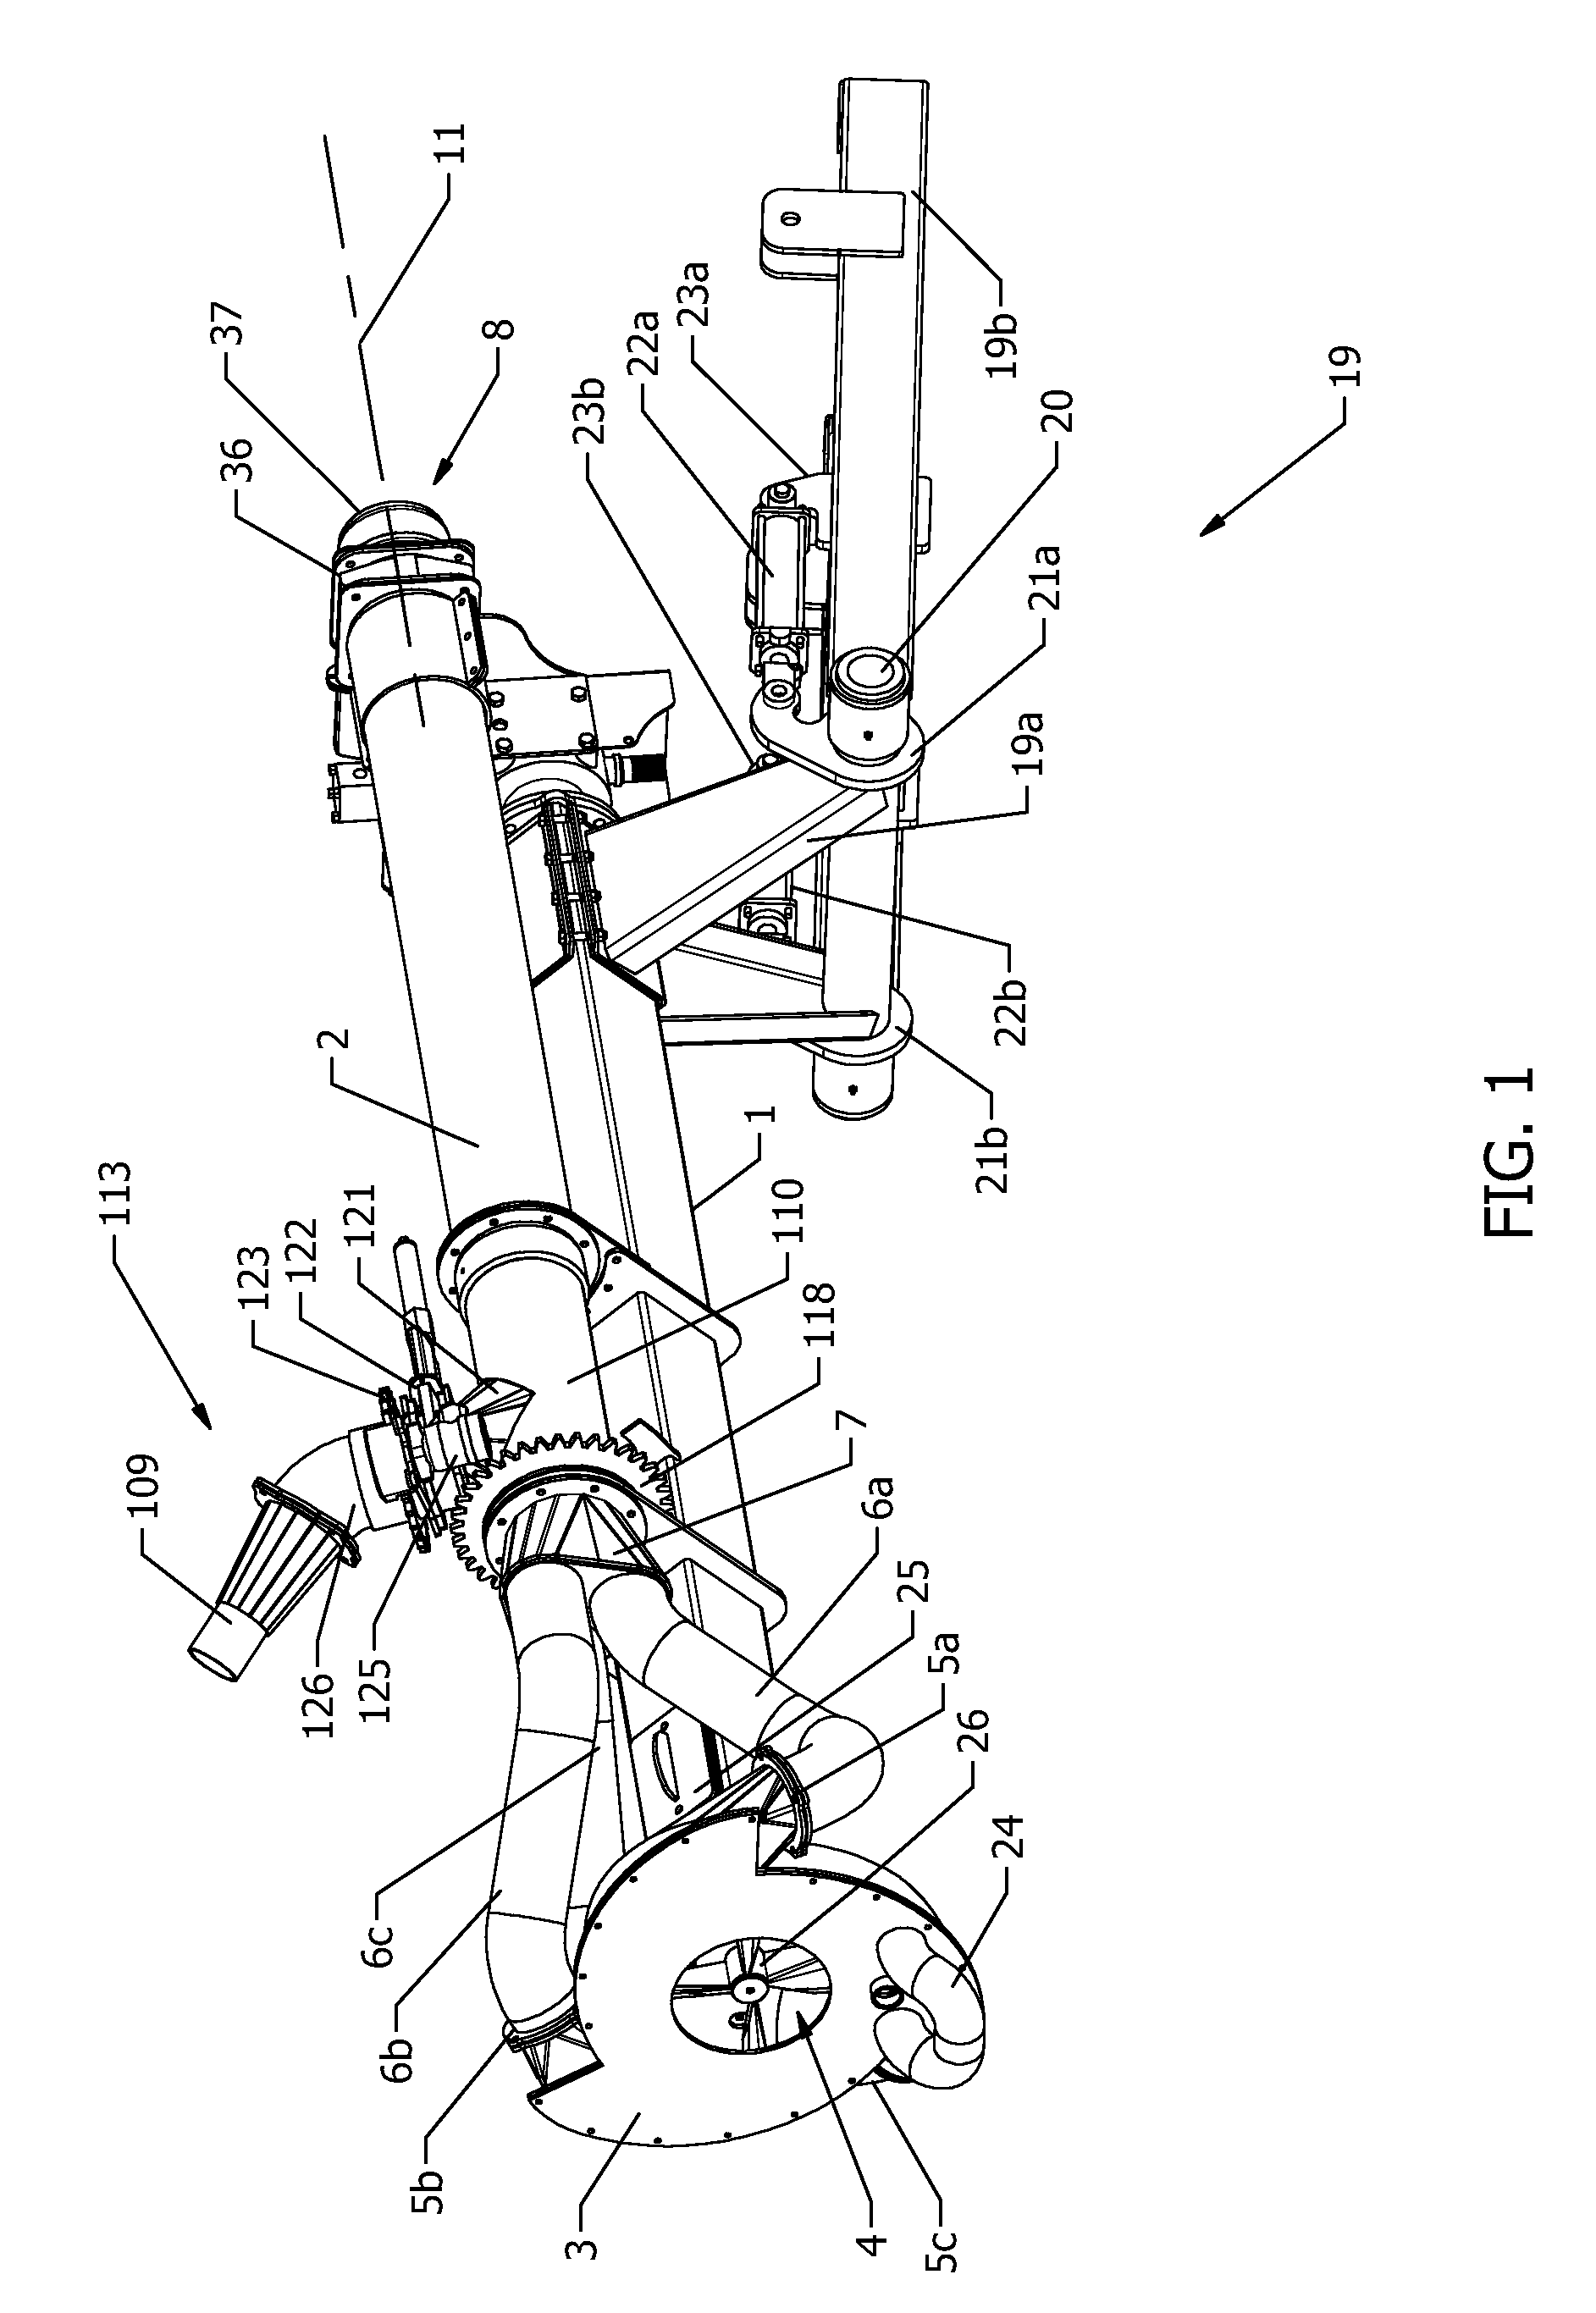 Pump for Immersion Within a Fluid Reservoir